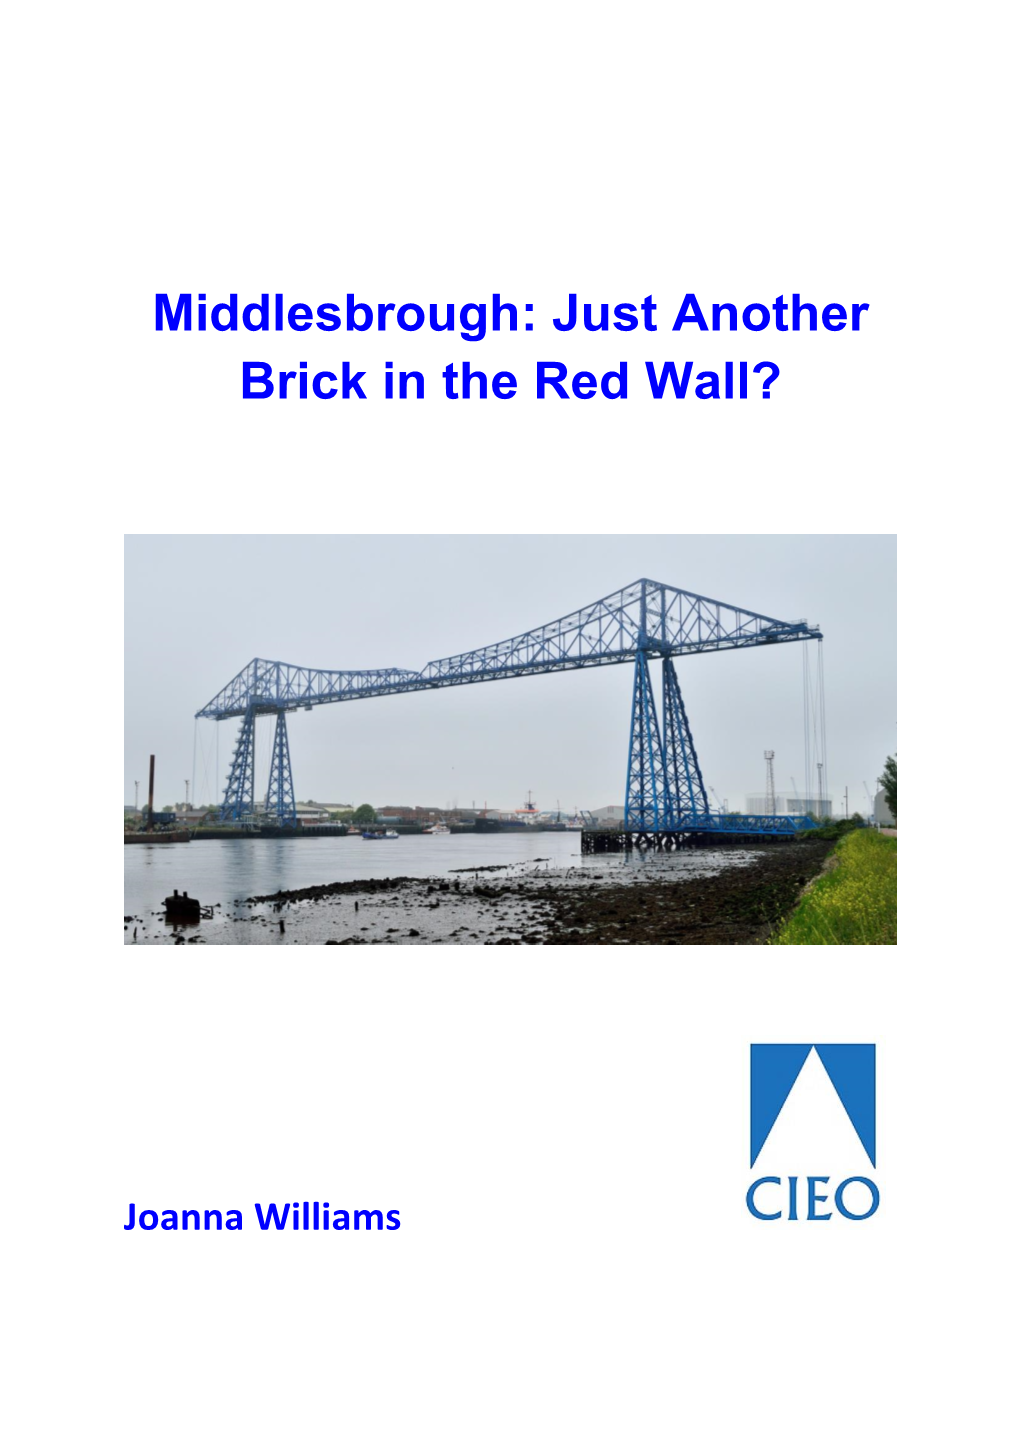 Middlesbrough: Just Another Brick in the Red Wall?